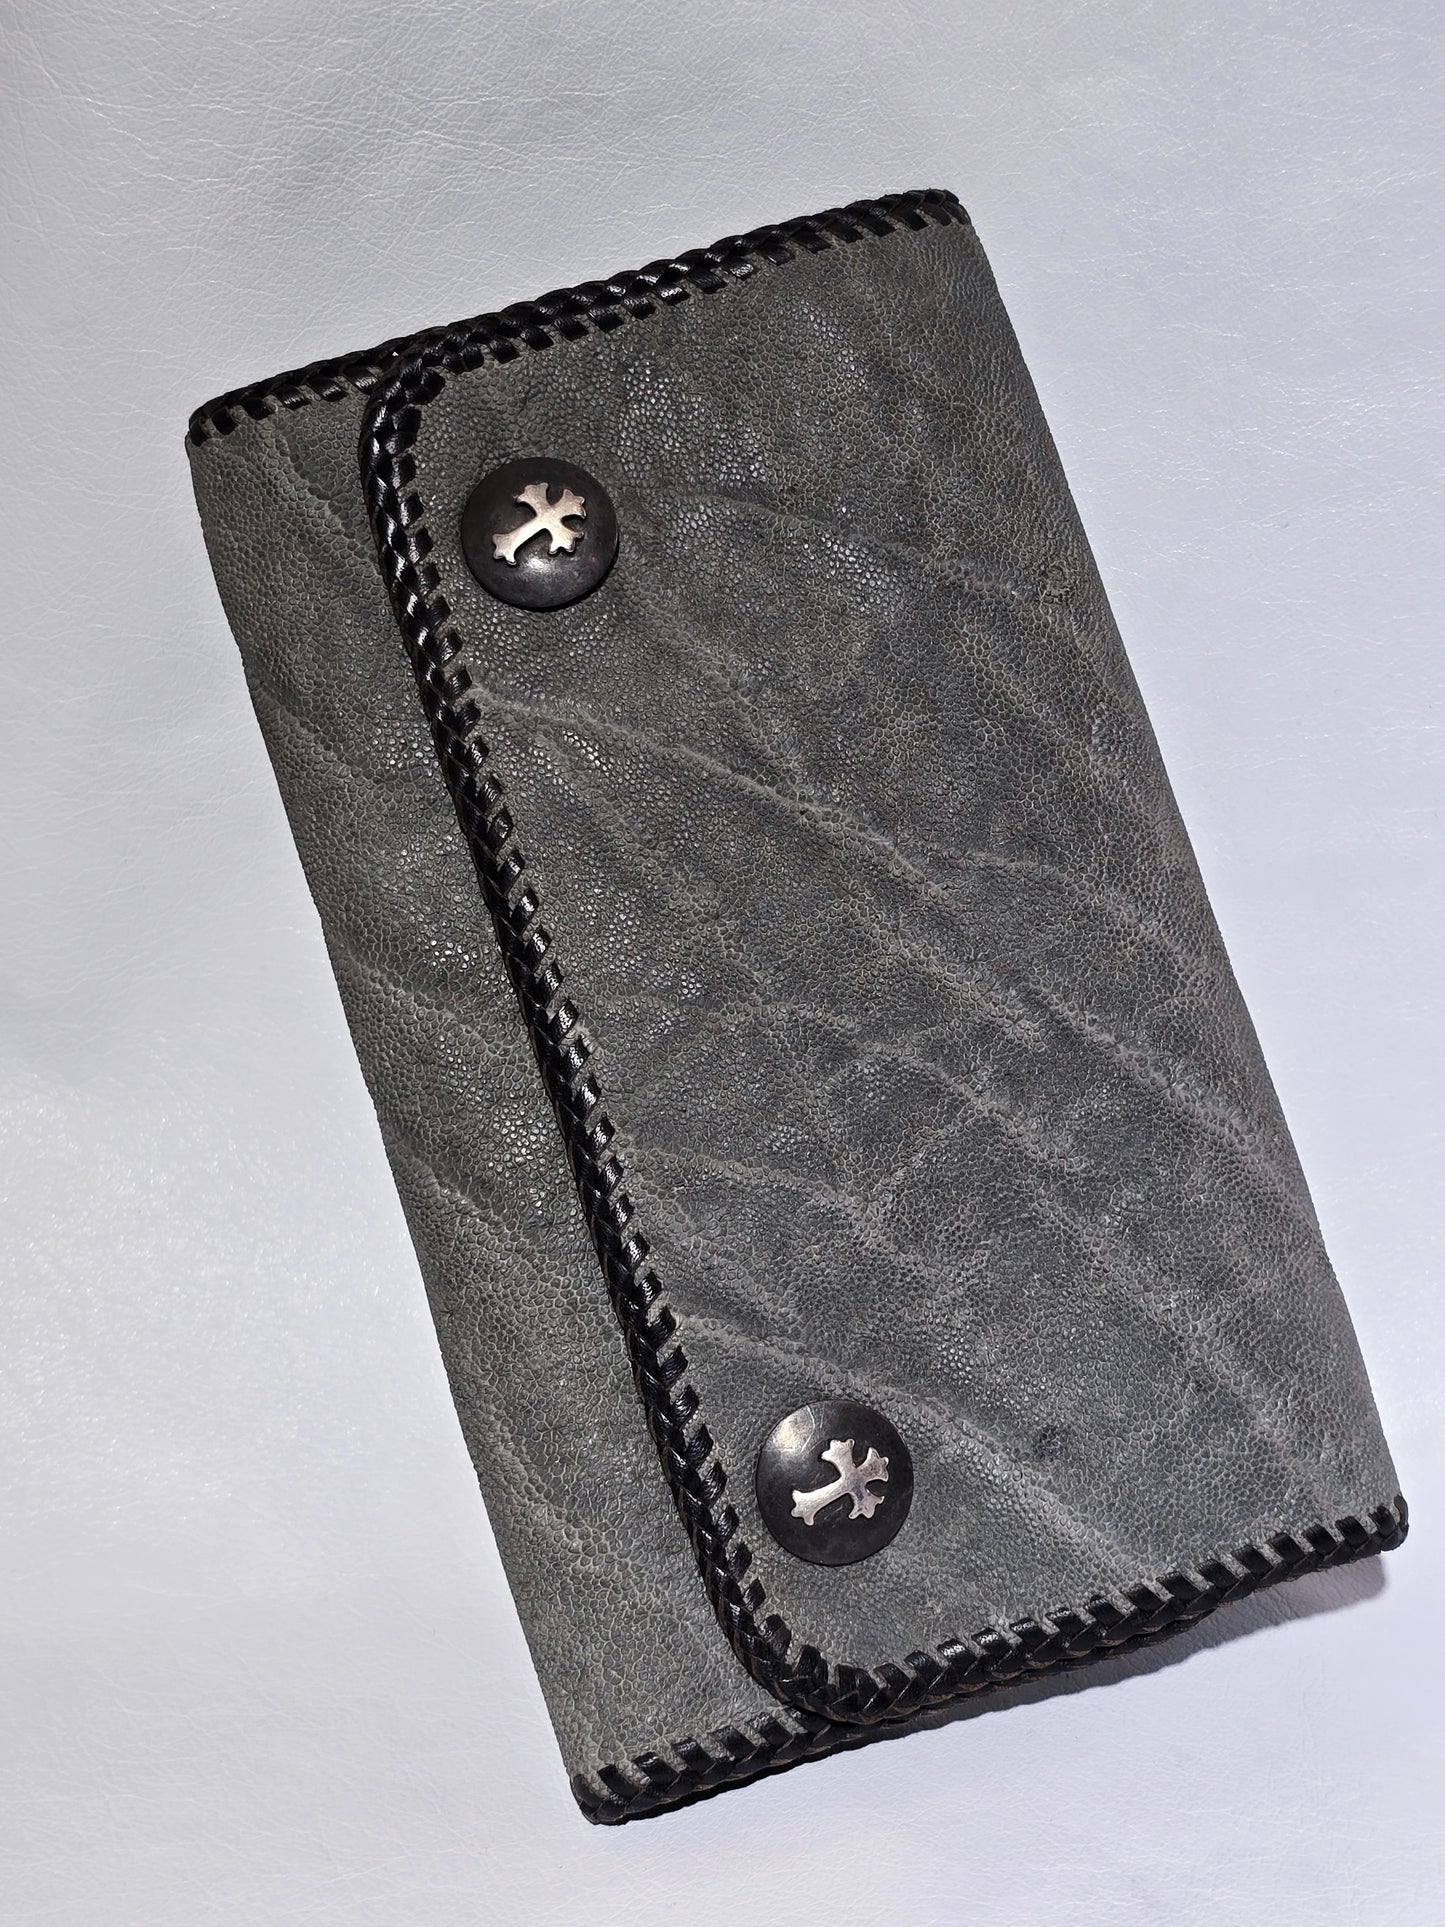 Elephant Large Biker Wallet with Stingray Cross Inlay